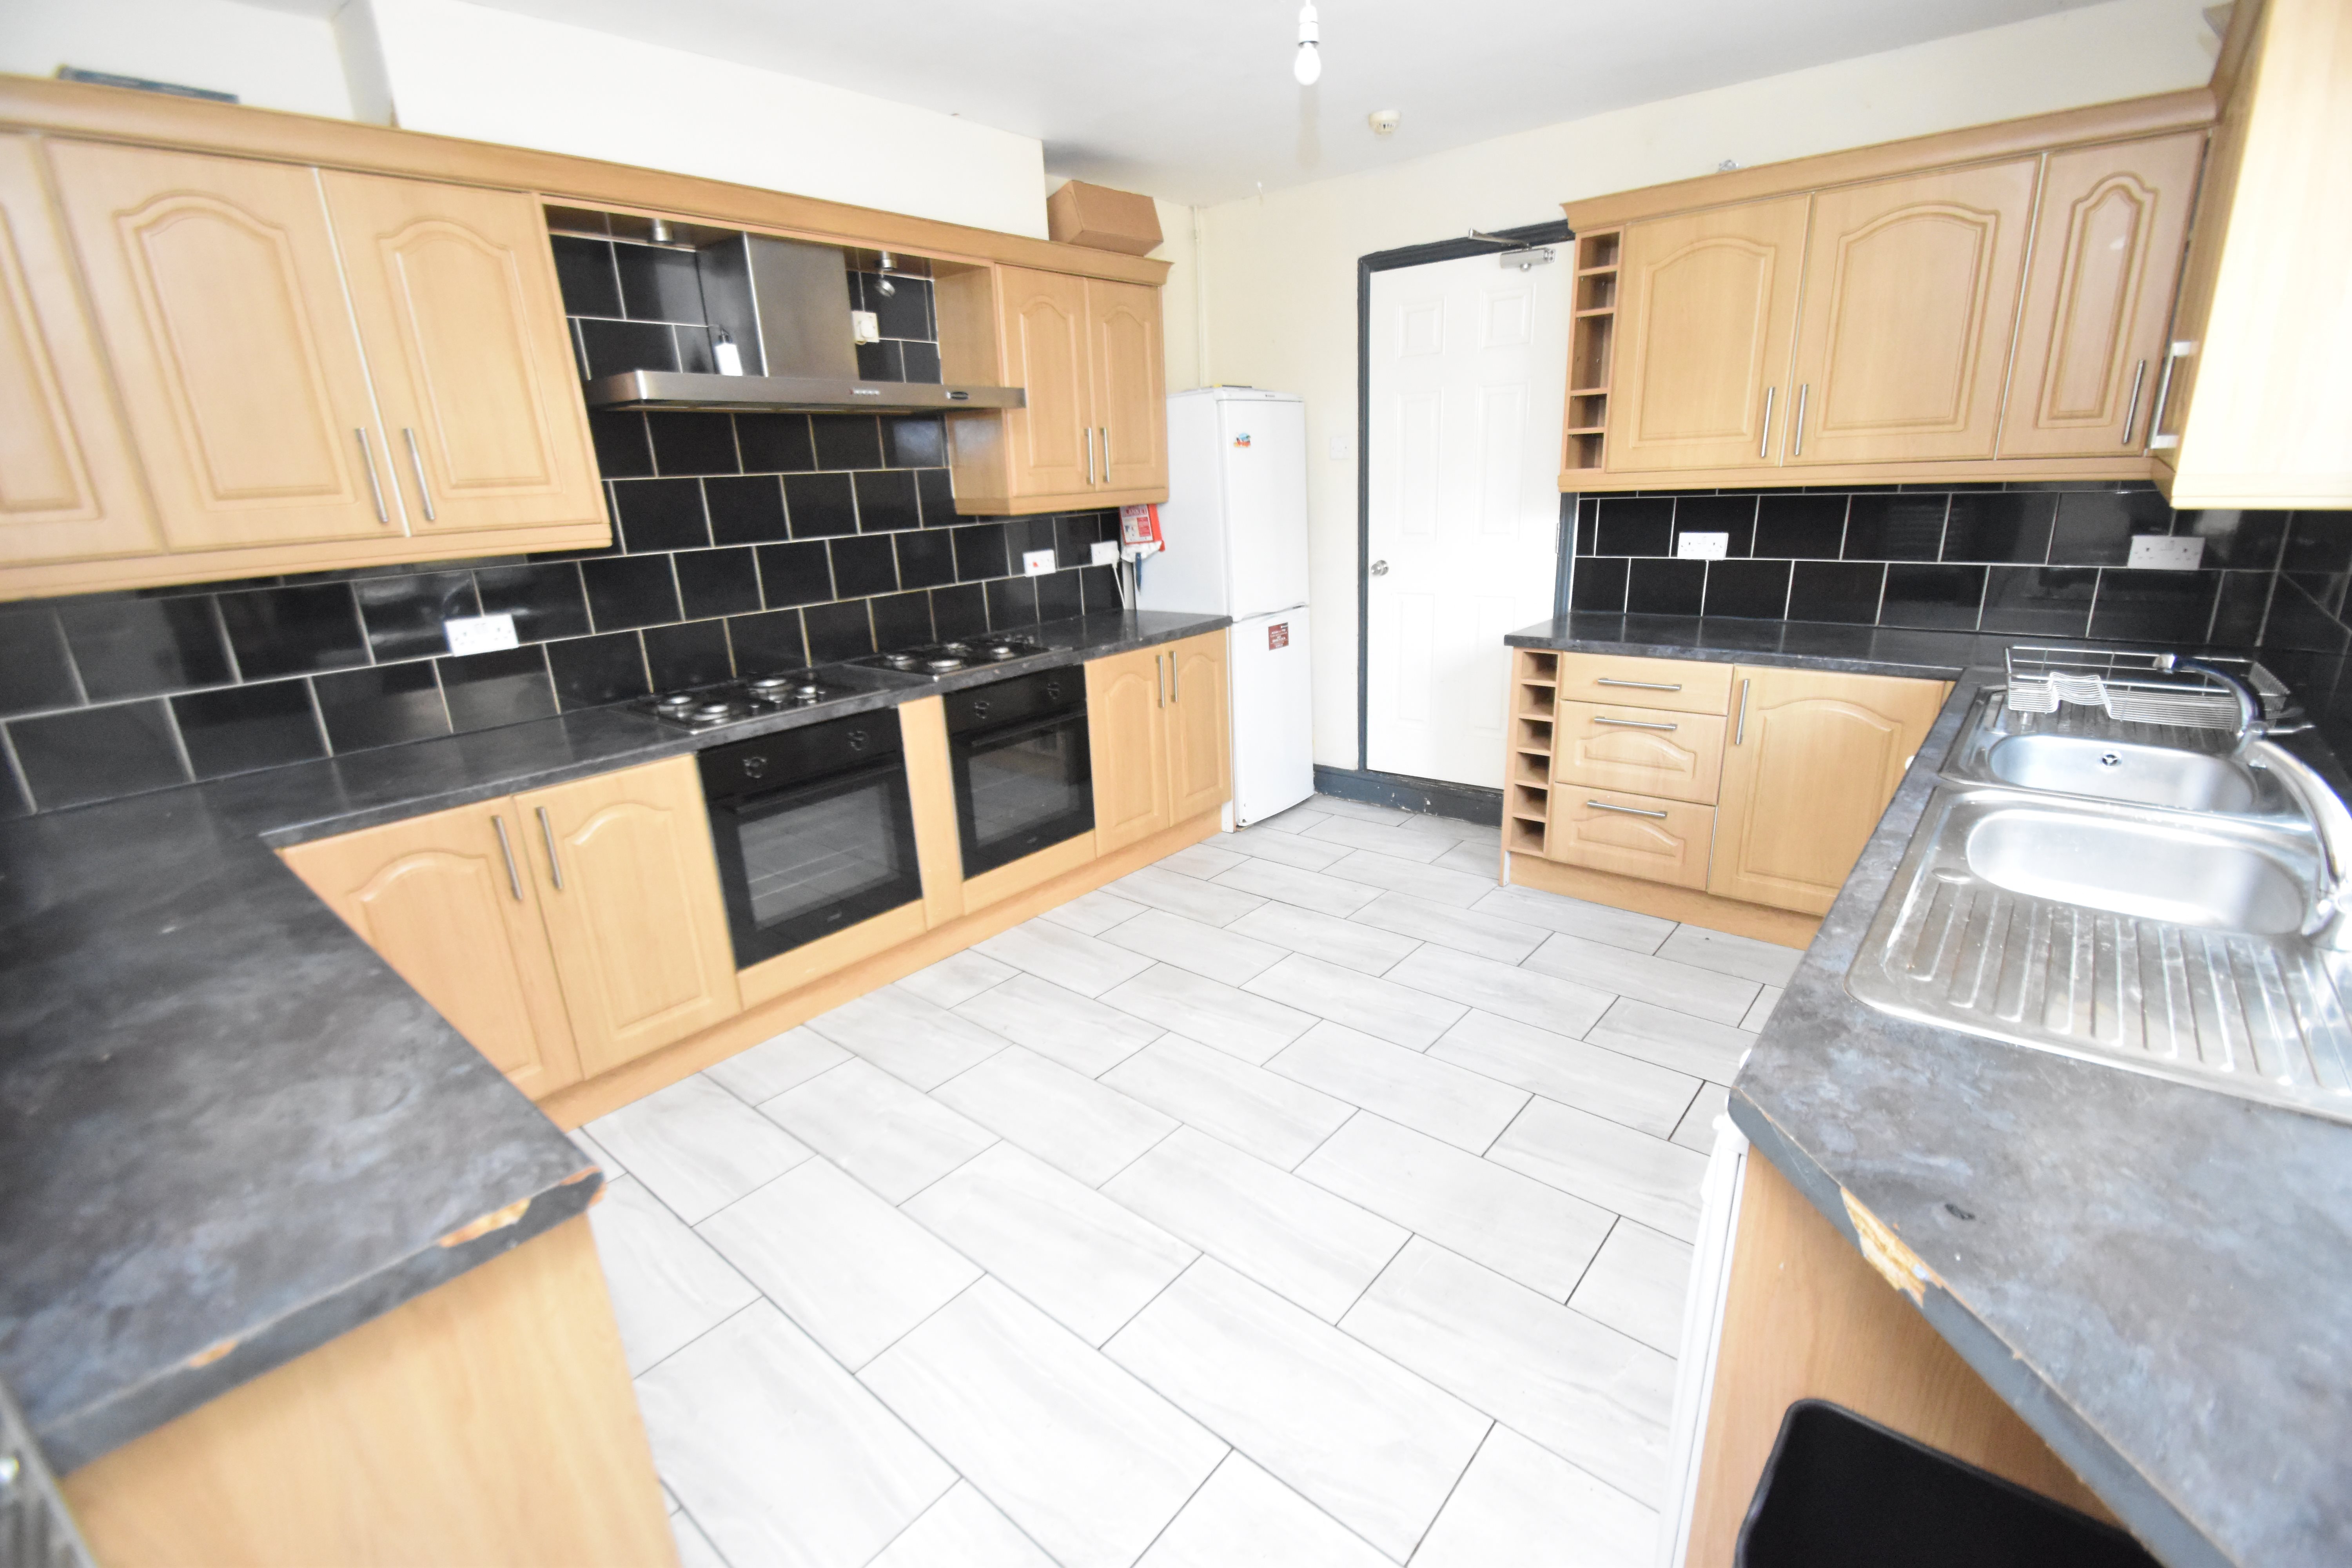 8 bed house to rent in Harriet Street, CATHAYS 1